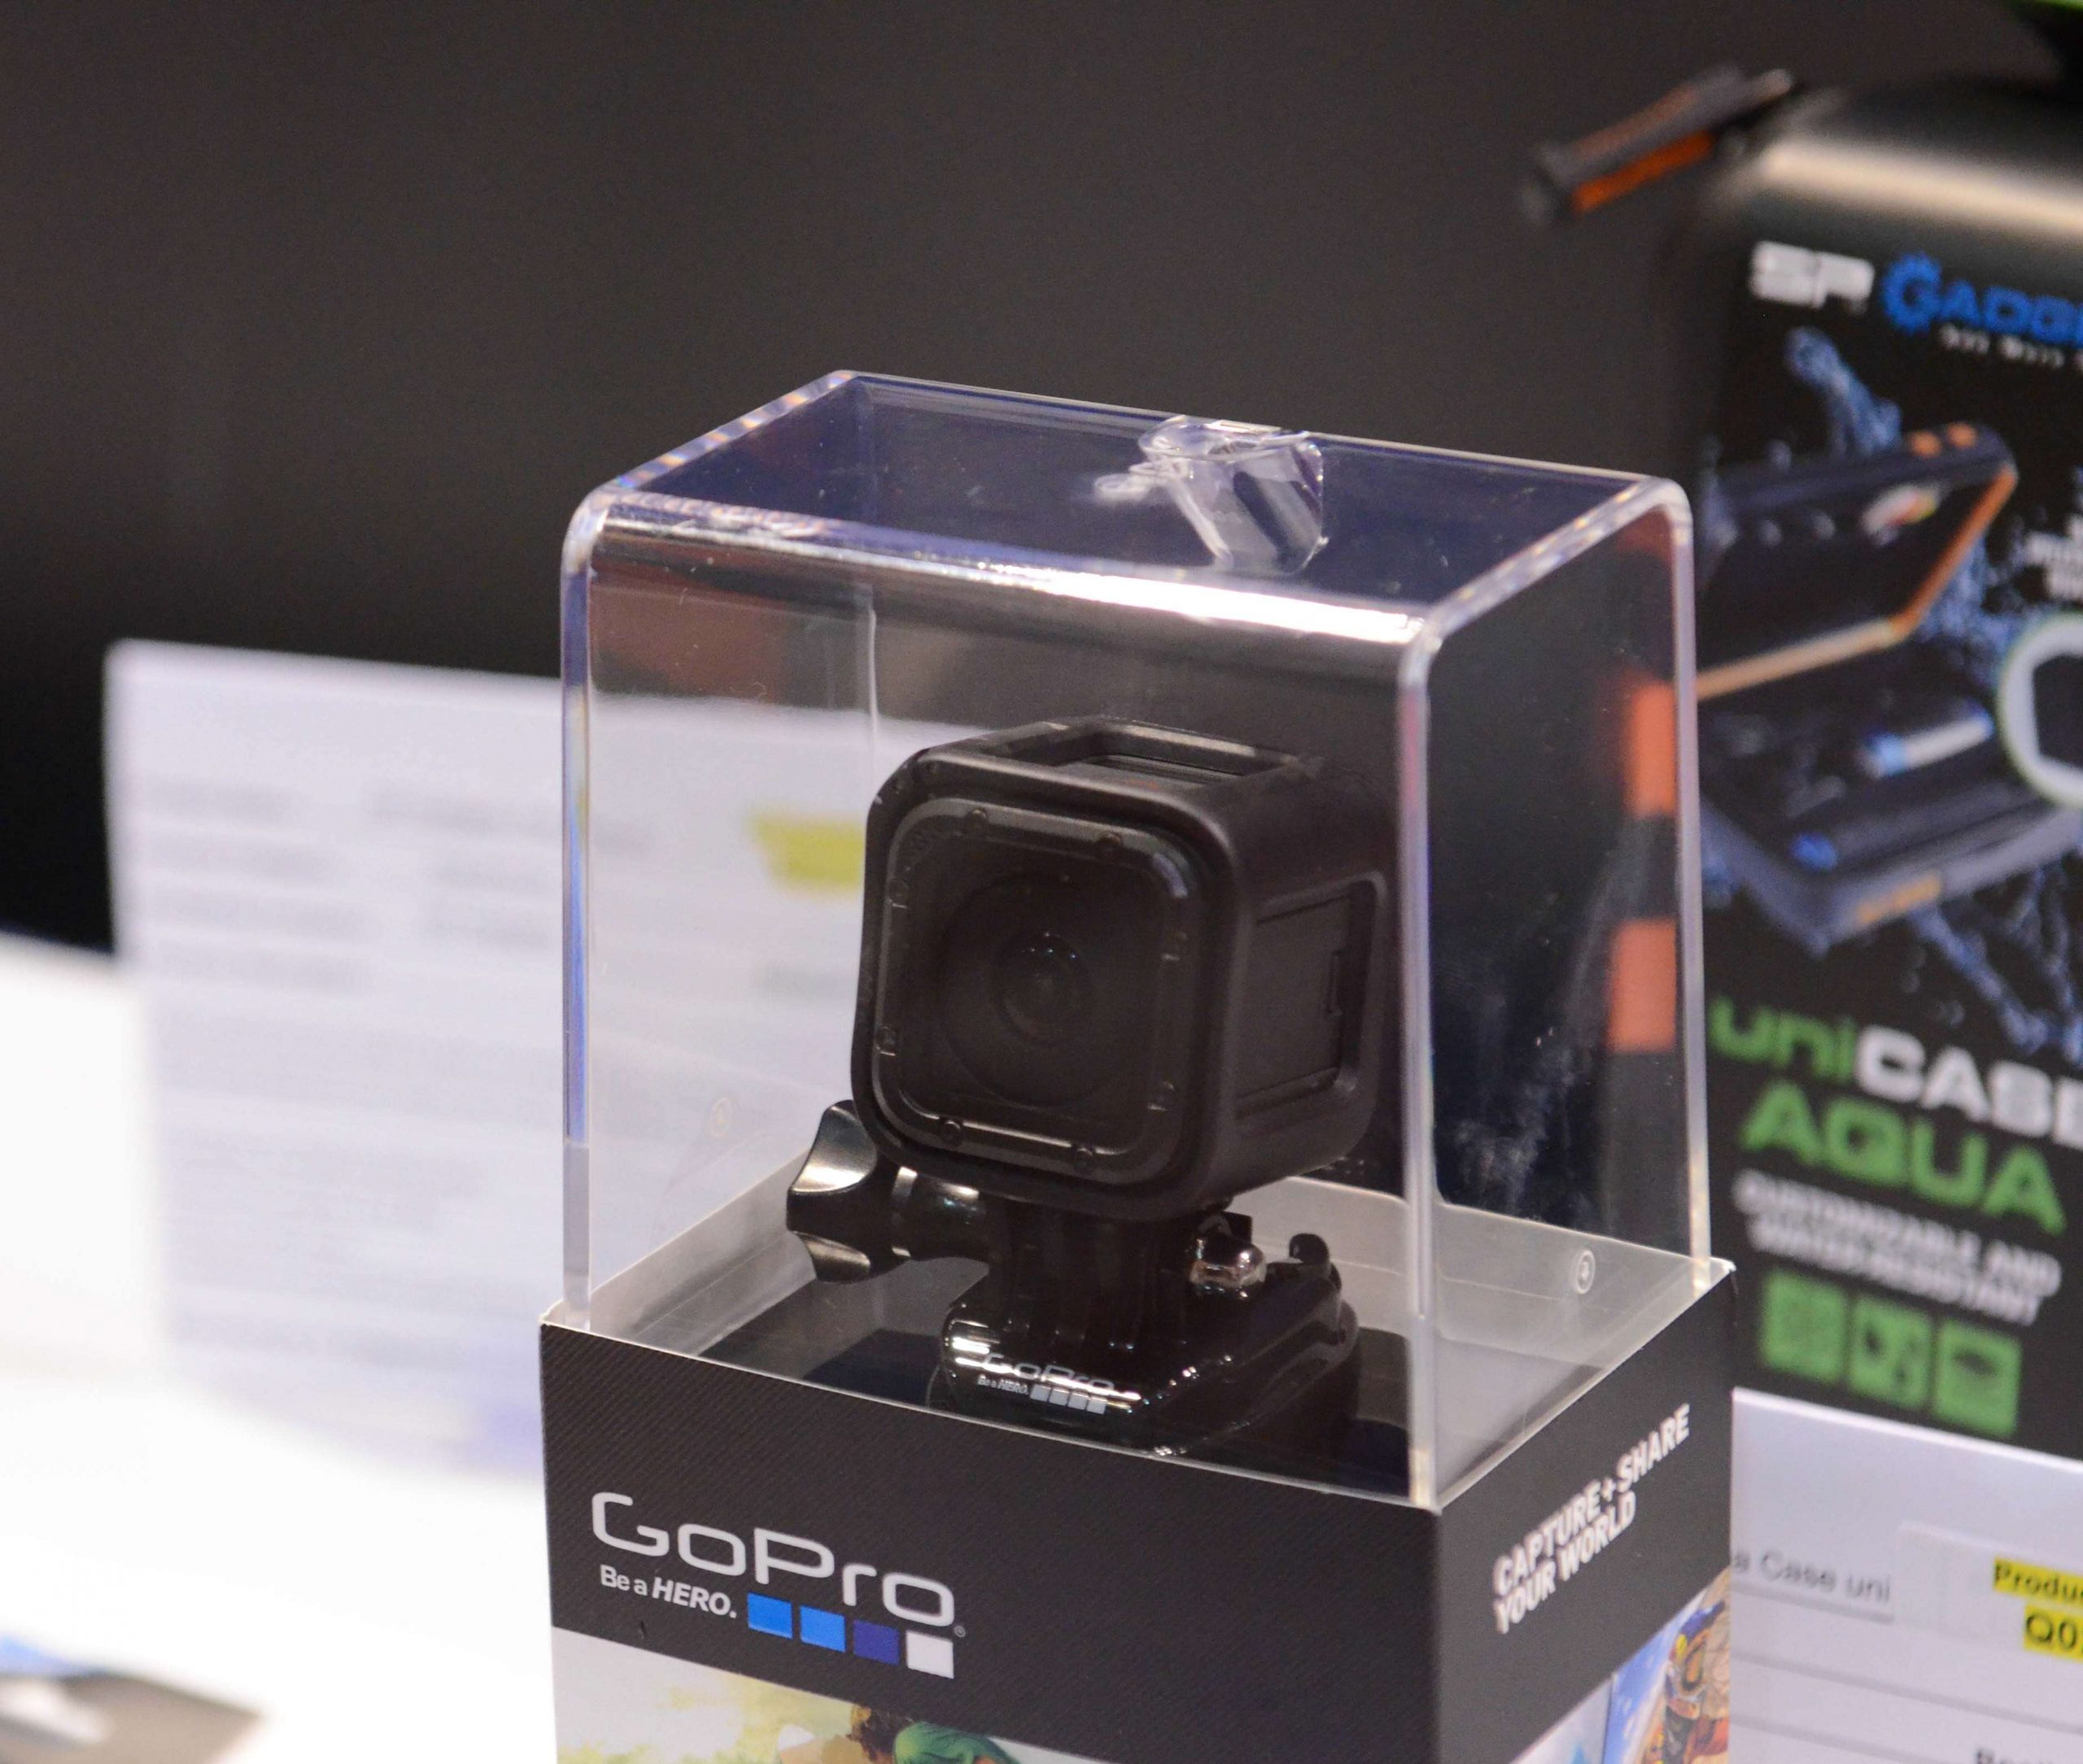 The Hero4 Session's design eliminates the need for a separate housing.